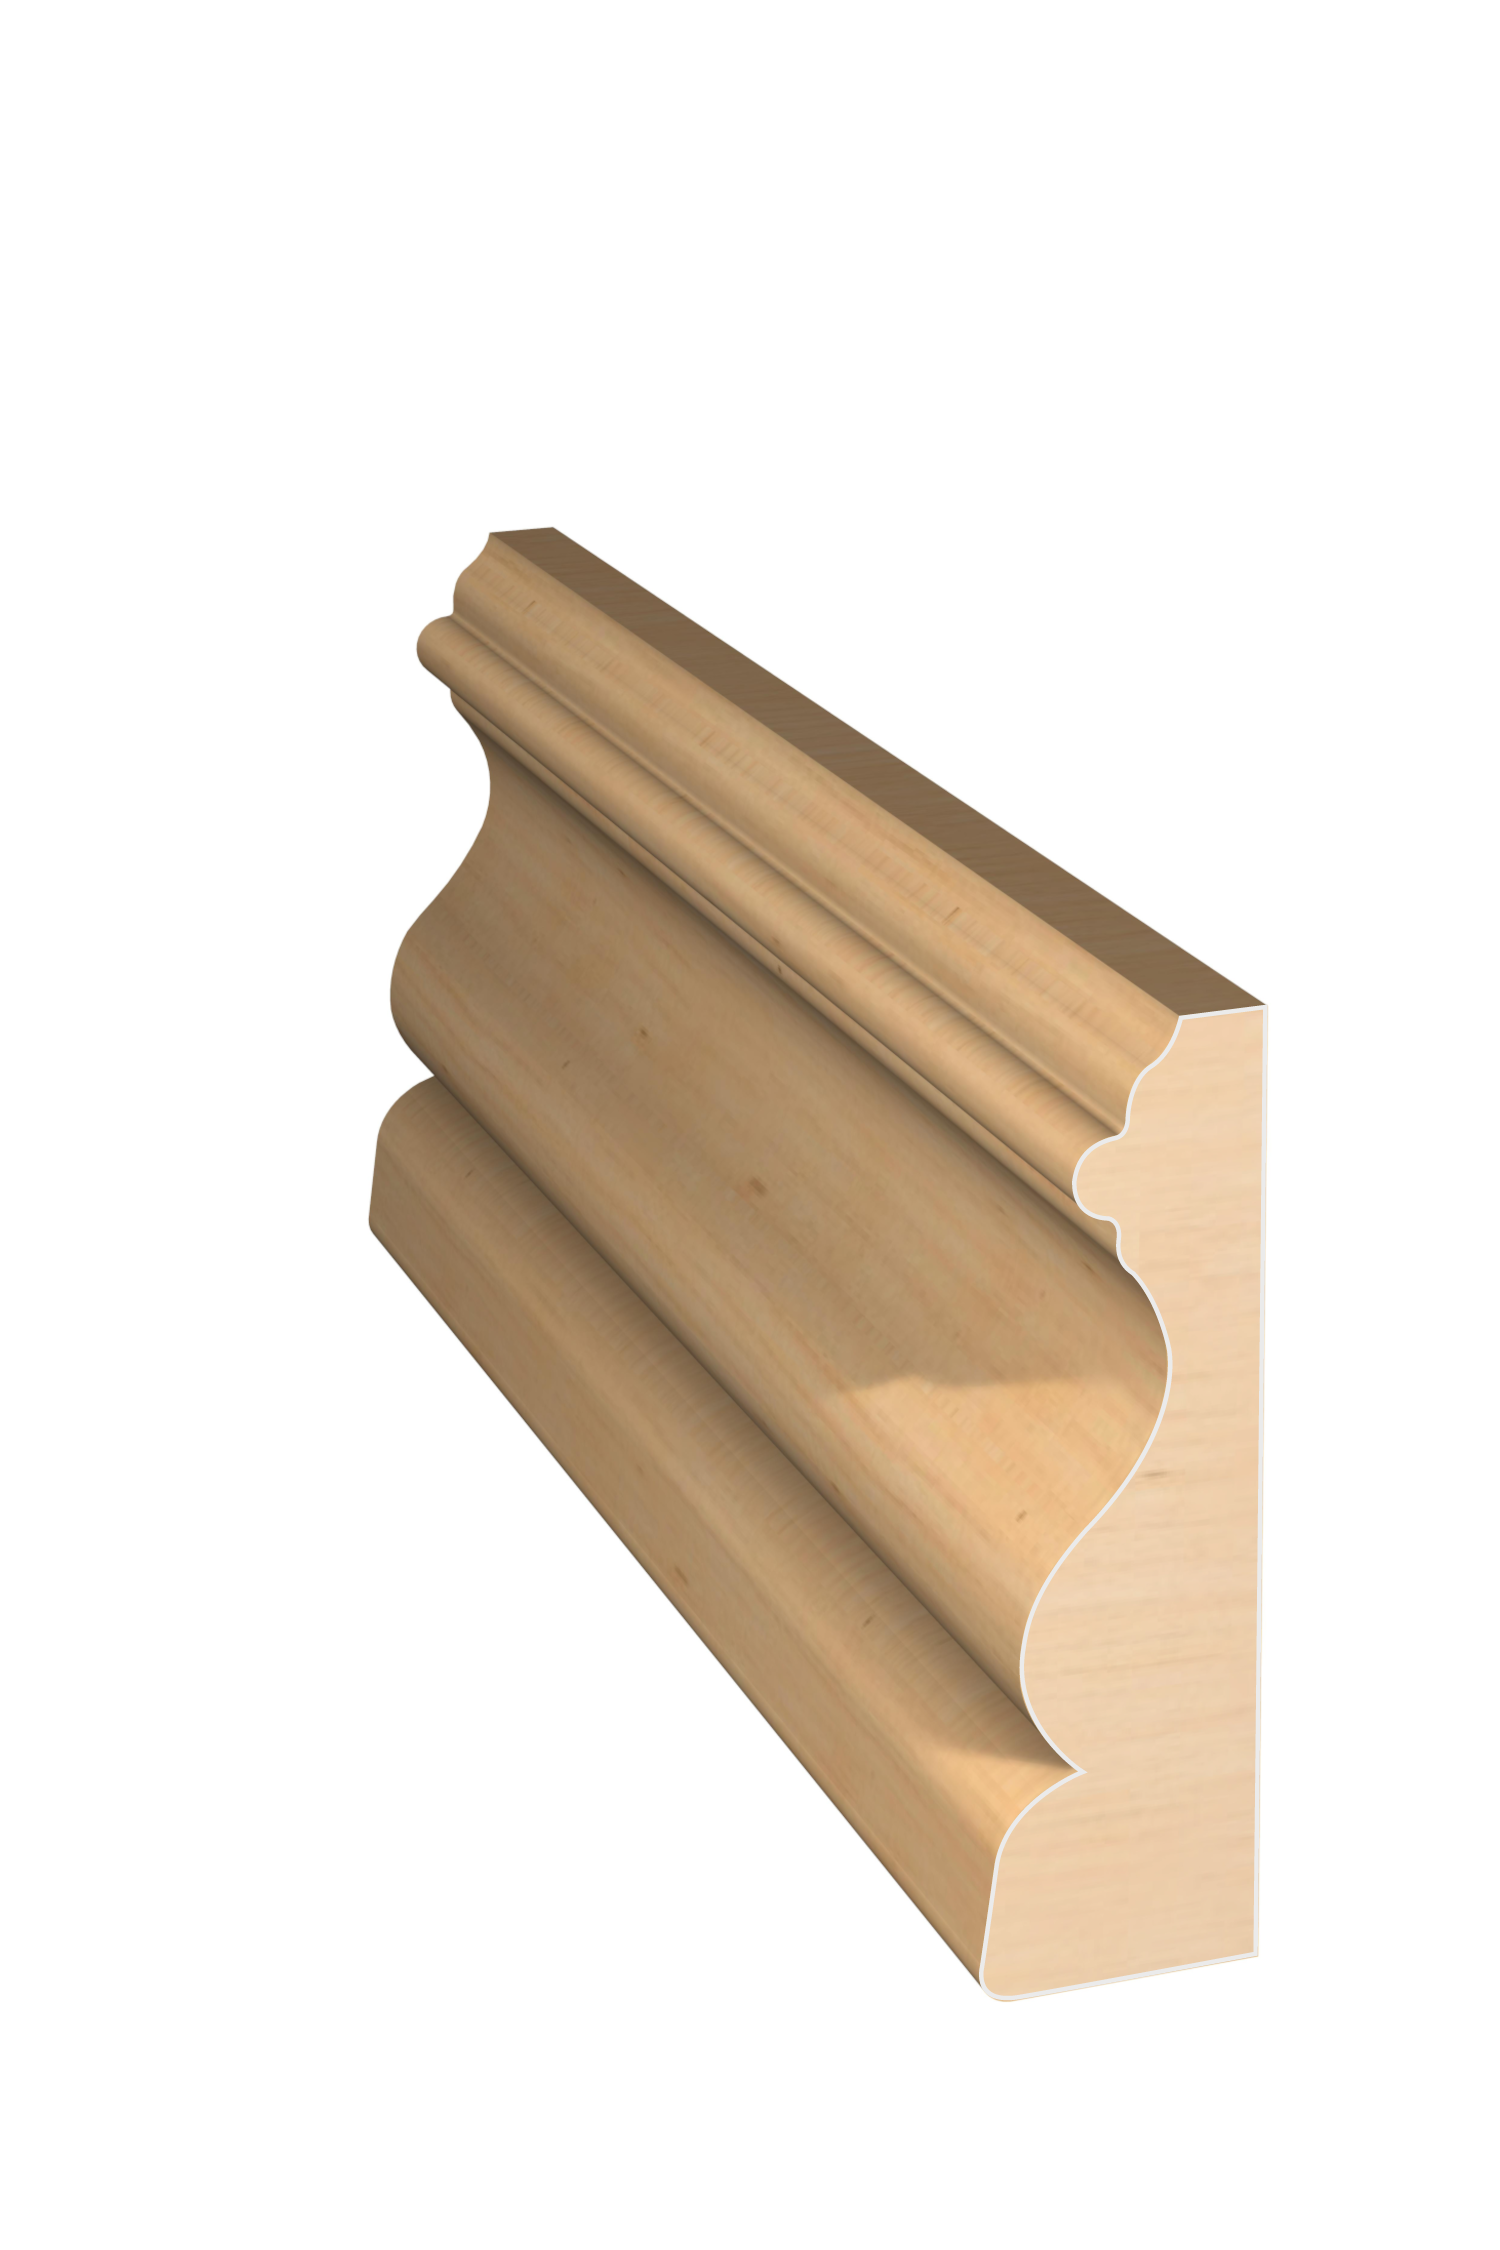 Three dimensional rendering of custom casing wood molding CAPL21224 made by Public Lumber Company in Detroit.